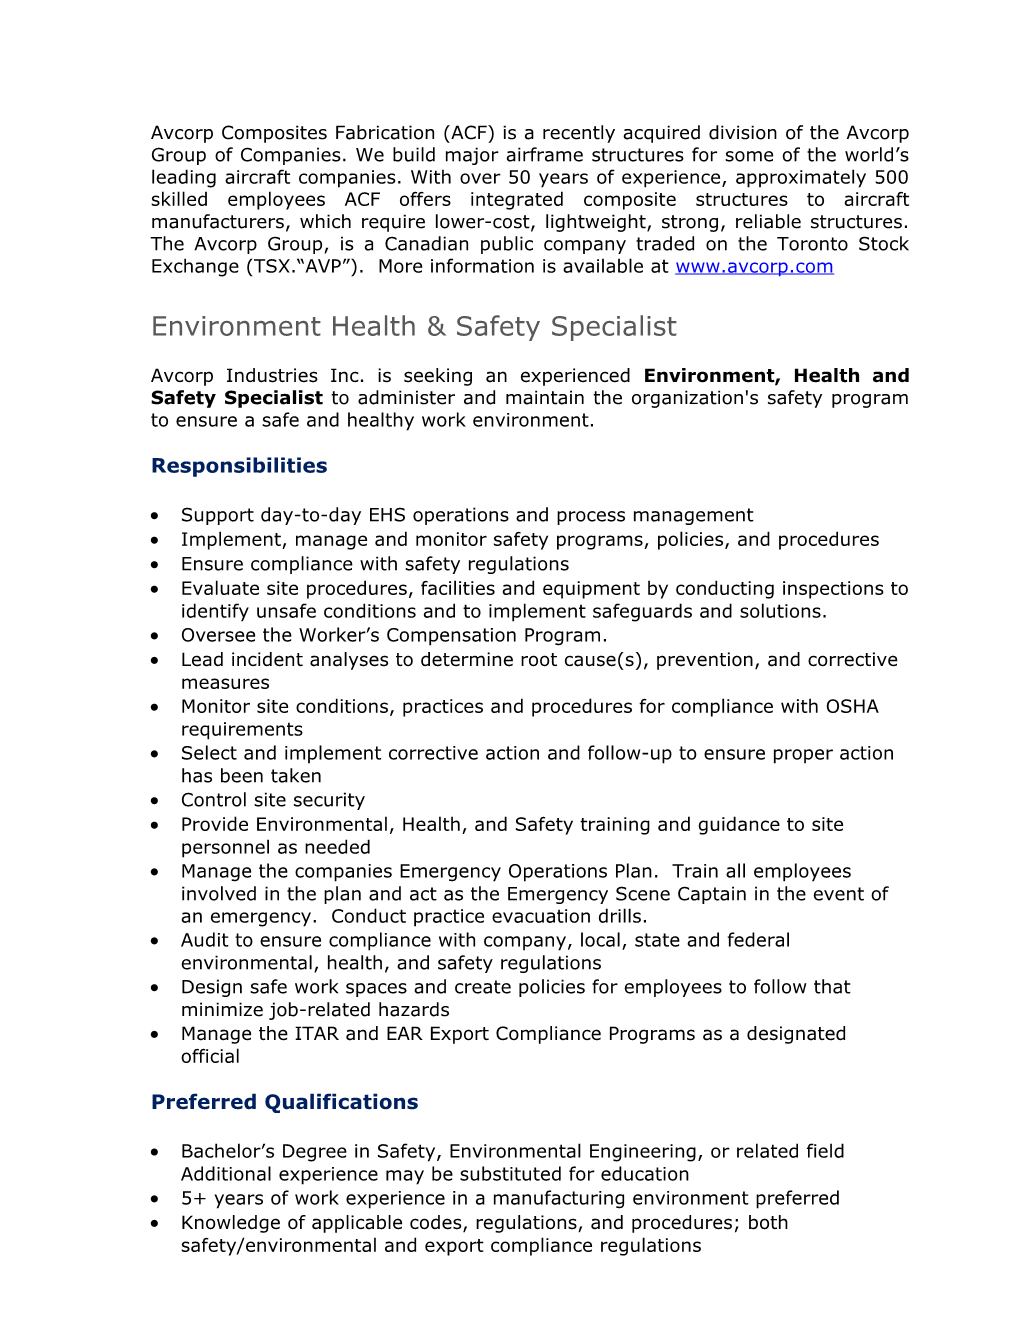 Environment Health & Safety Specialist